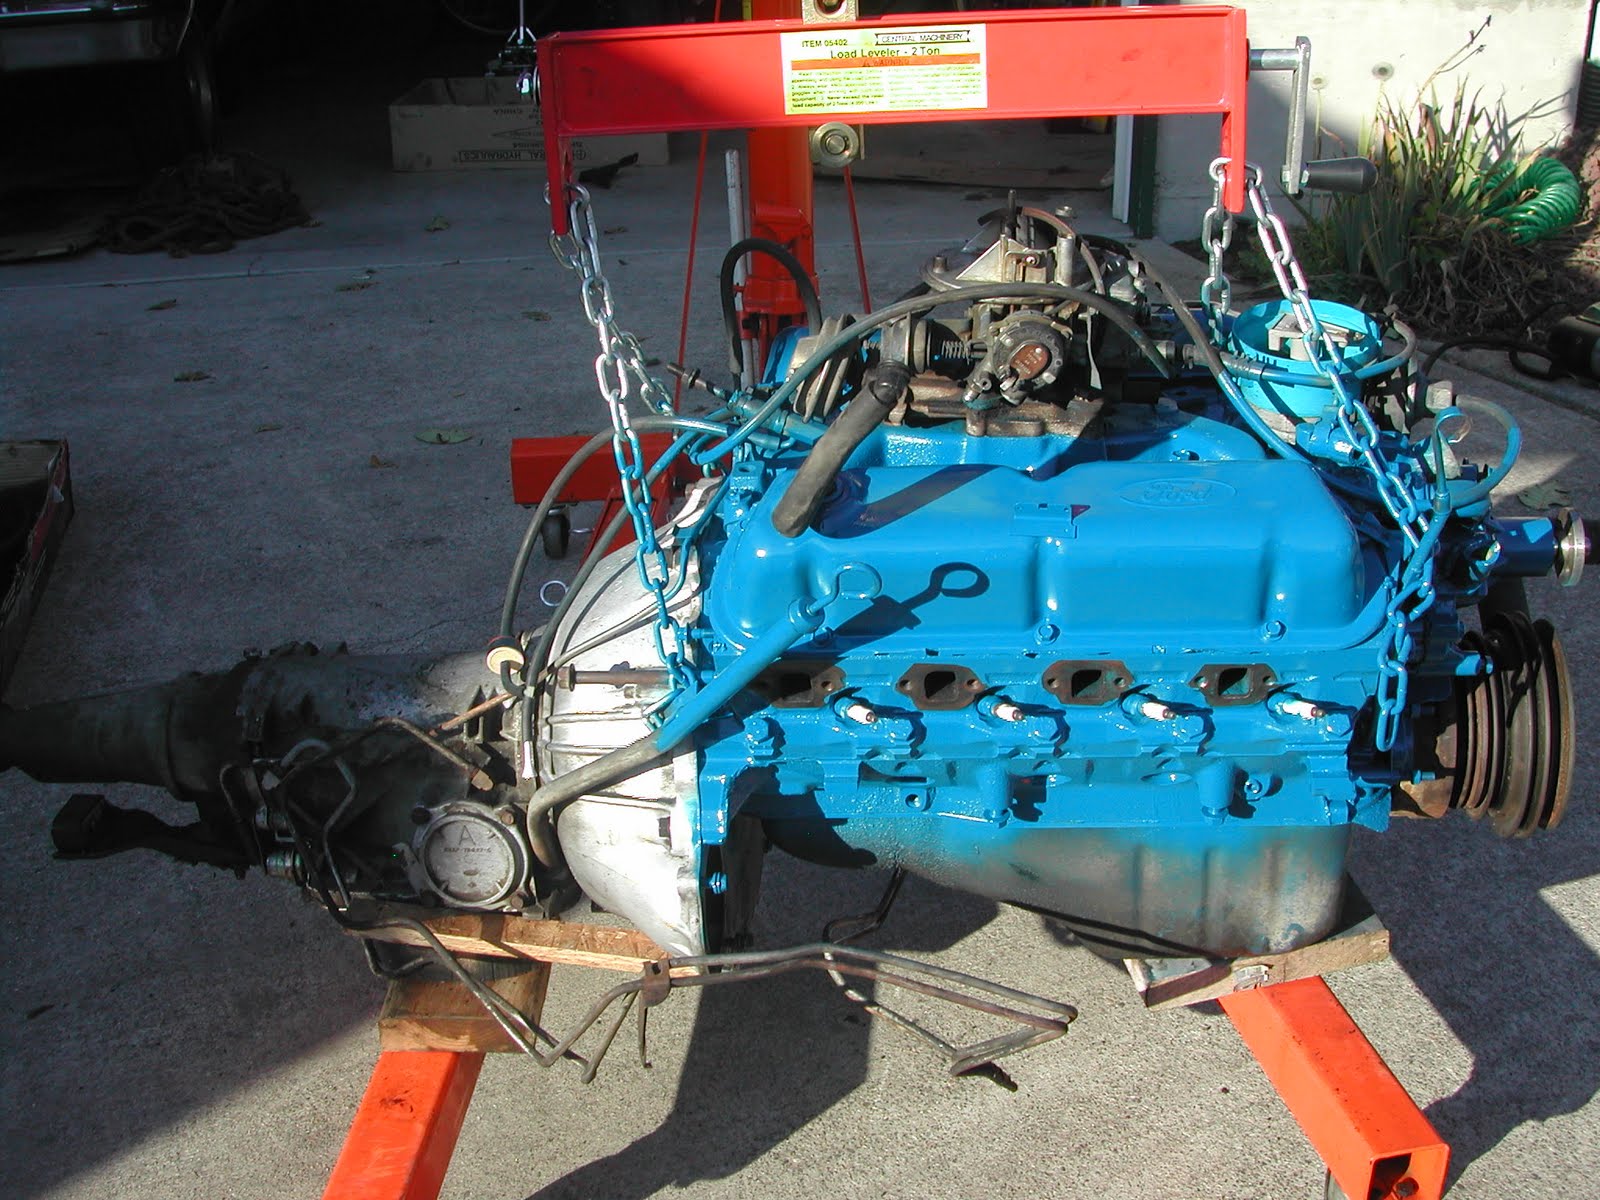 Dan's Blog: The Great Bronco Engine Transplant-Small Projects